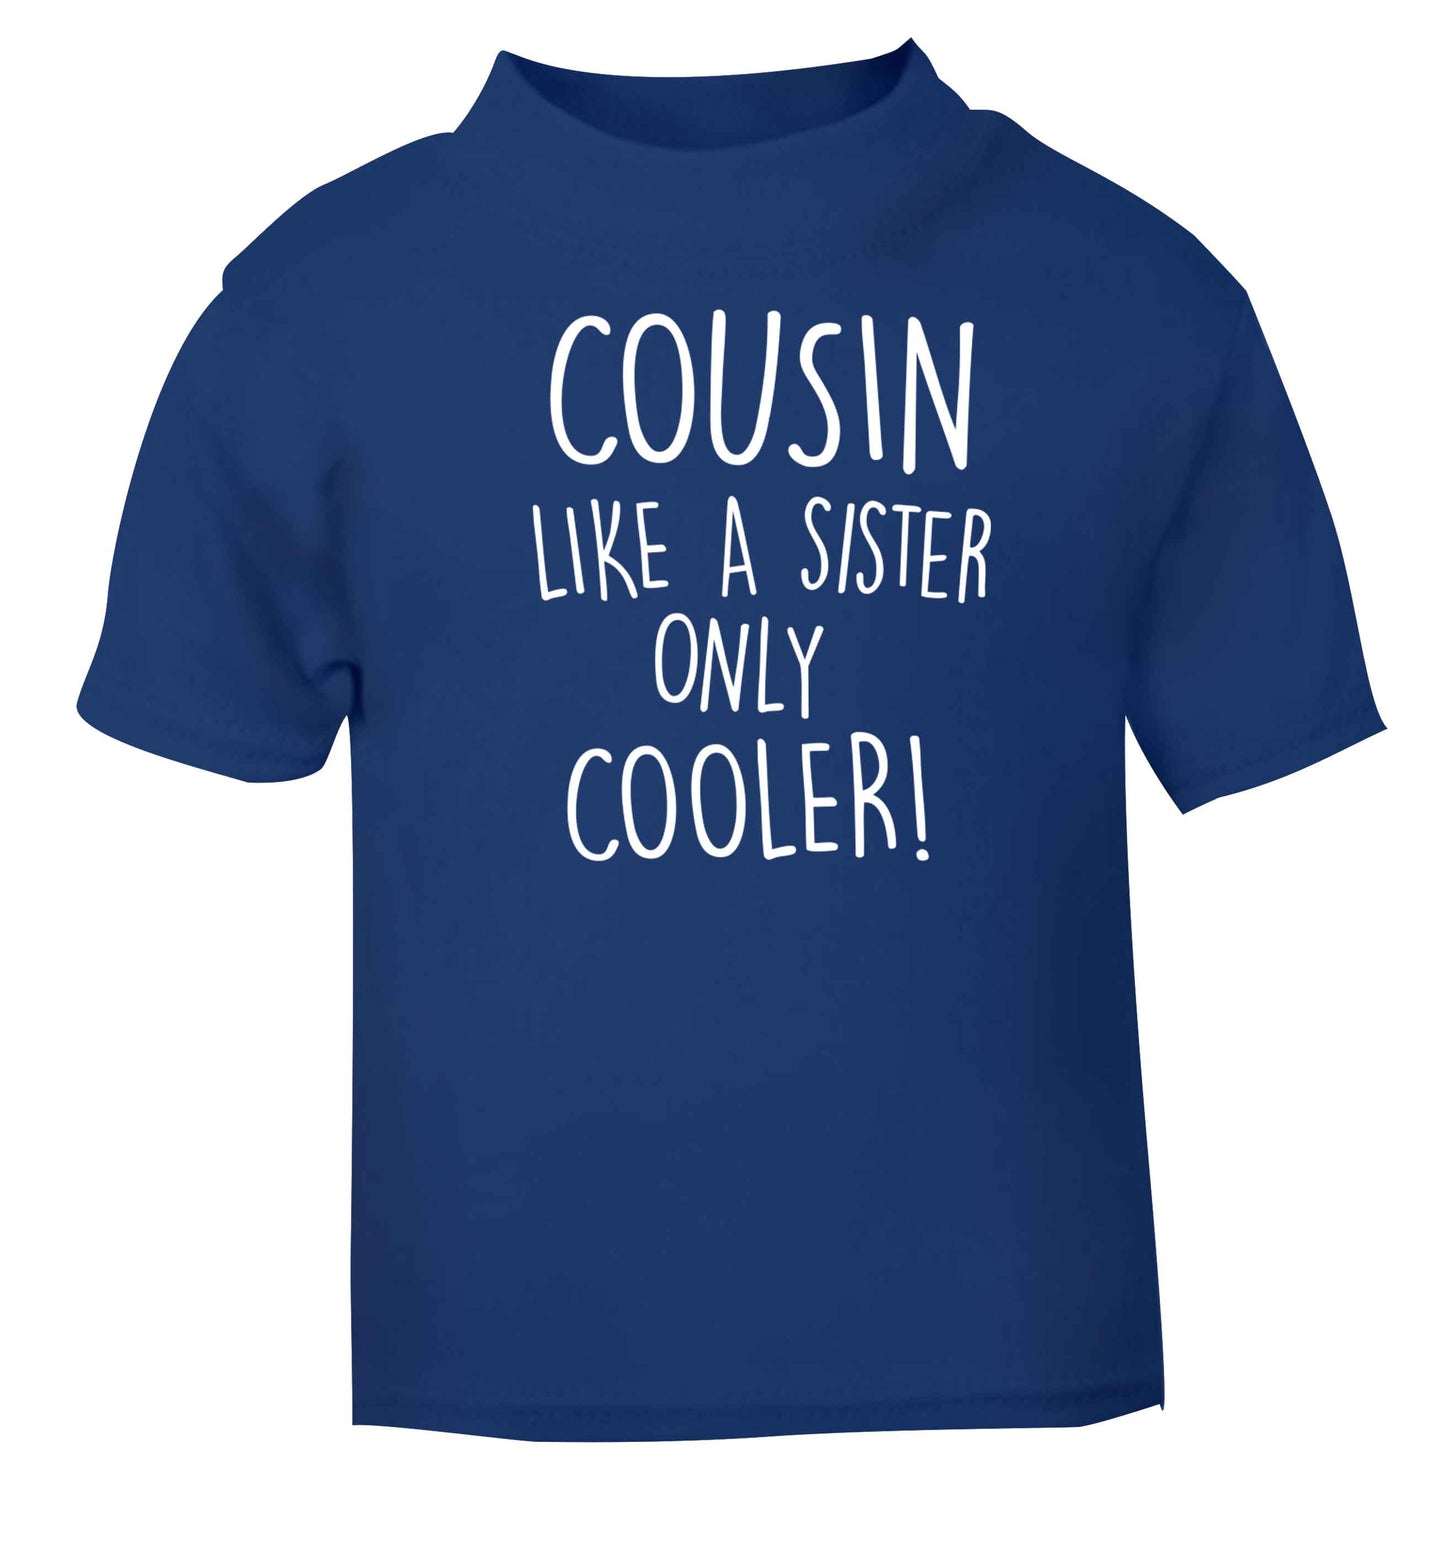 Cousin like a sister only cooler blue baby toddler Tshirt 2 Years